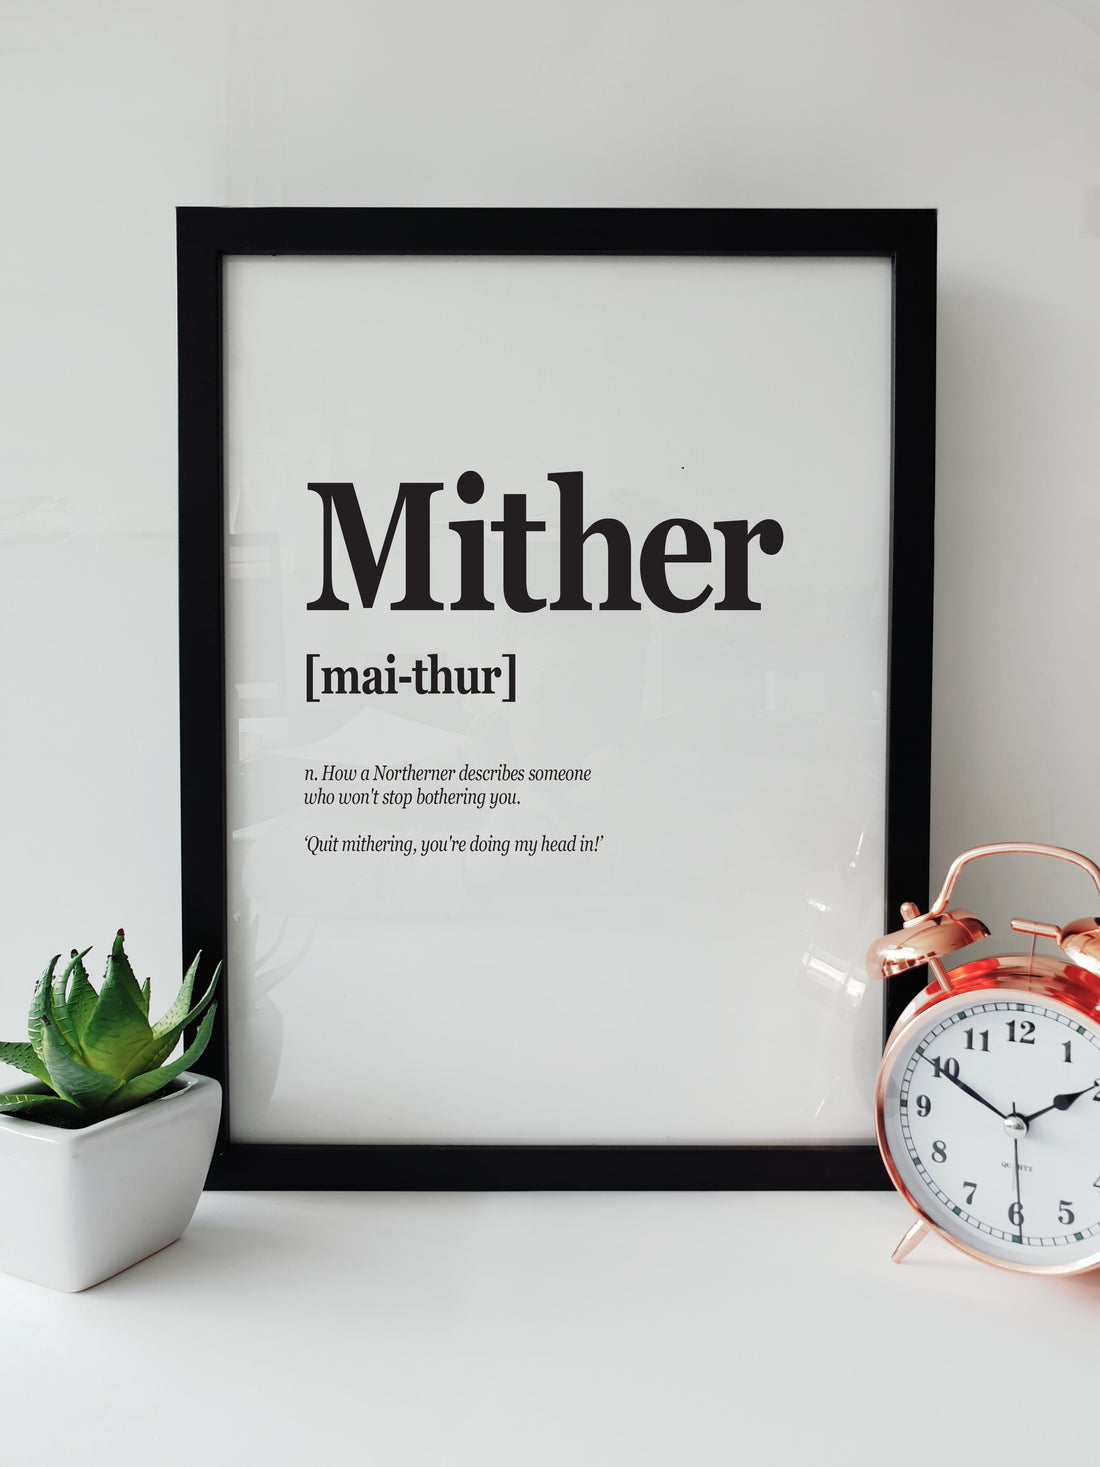 Mither funny Mancunian dialect definition print featuring the quote "Quit mithering, you're doing my head in!" by Local Lingo. northern slang